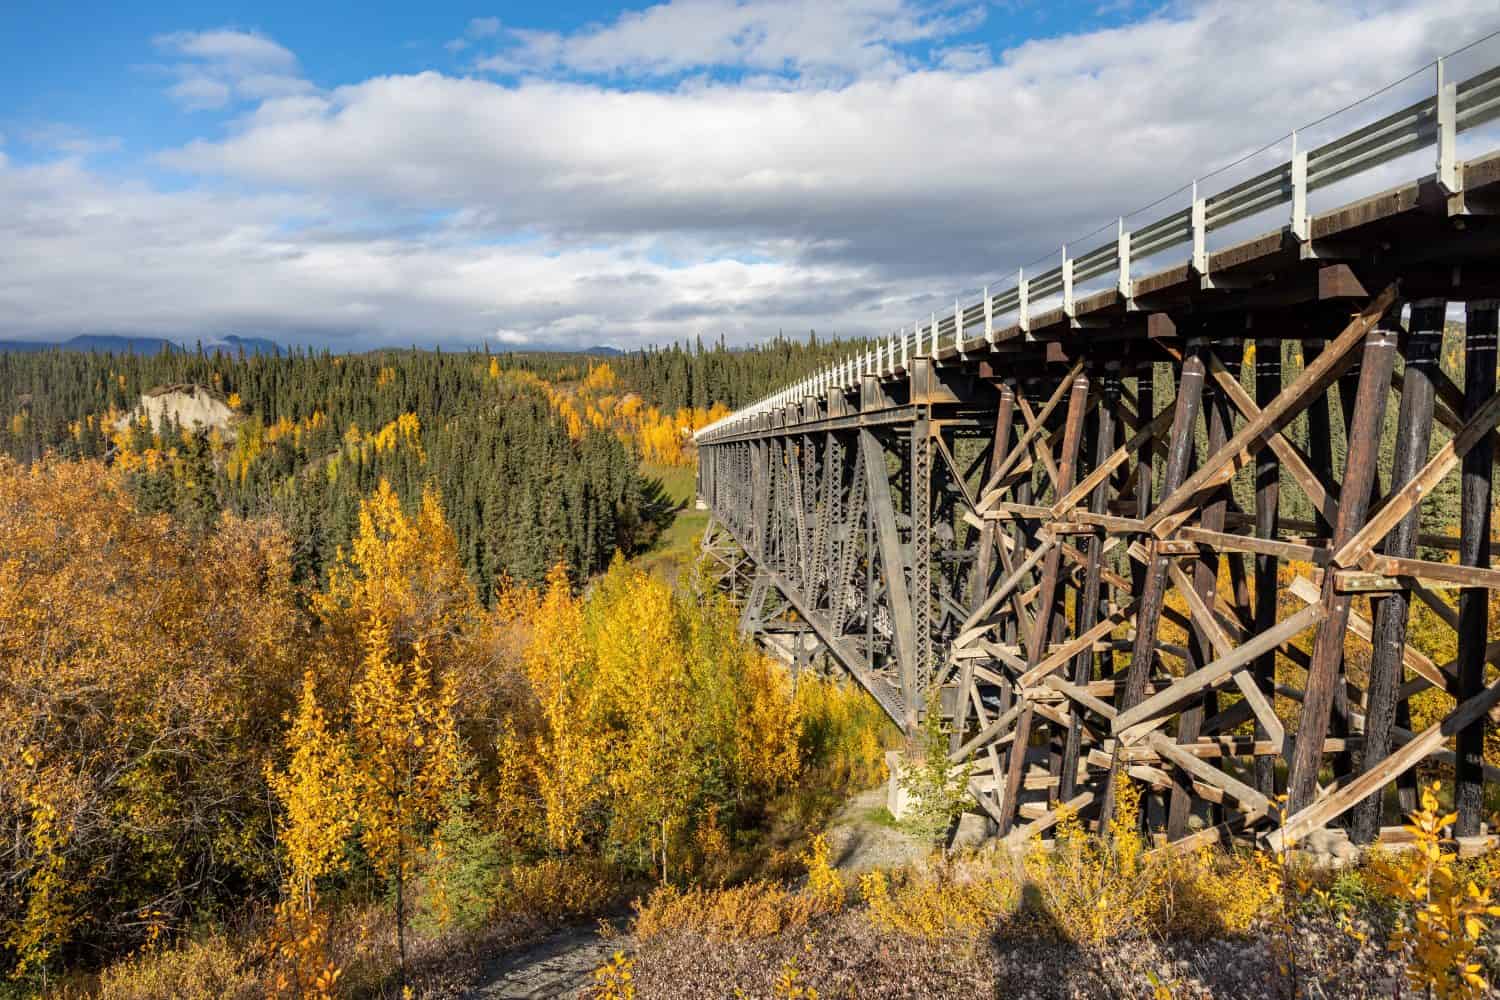 View of Kuskulana River Bridge in Wrangell St Elias National park with mountains and fall colors